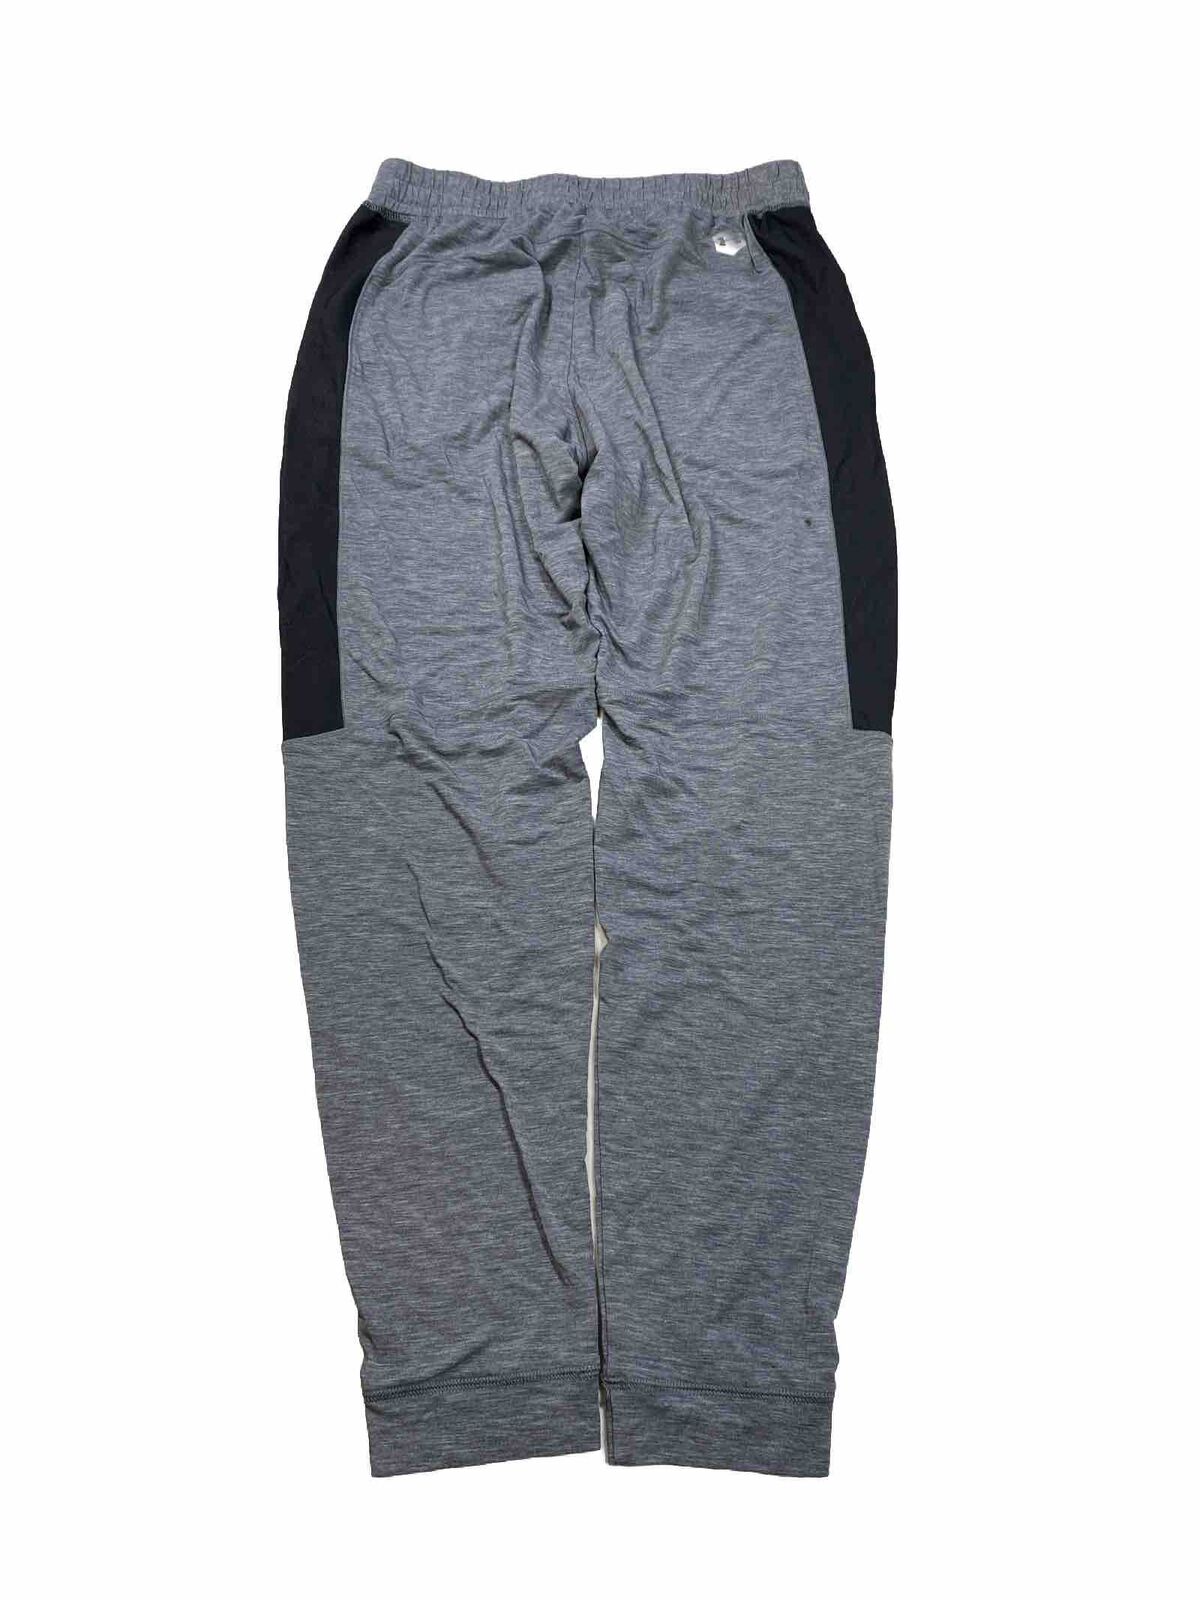 Under Armour Women's Gray Recovery Sleepwear Jogger Pants - S